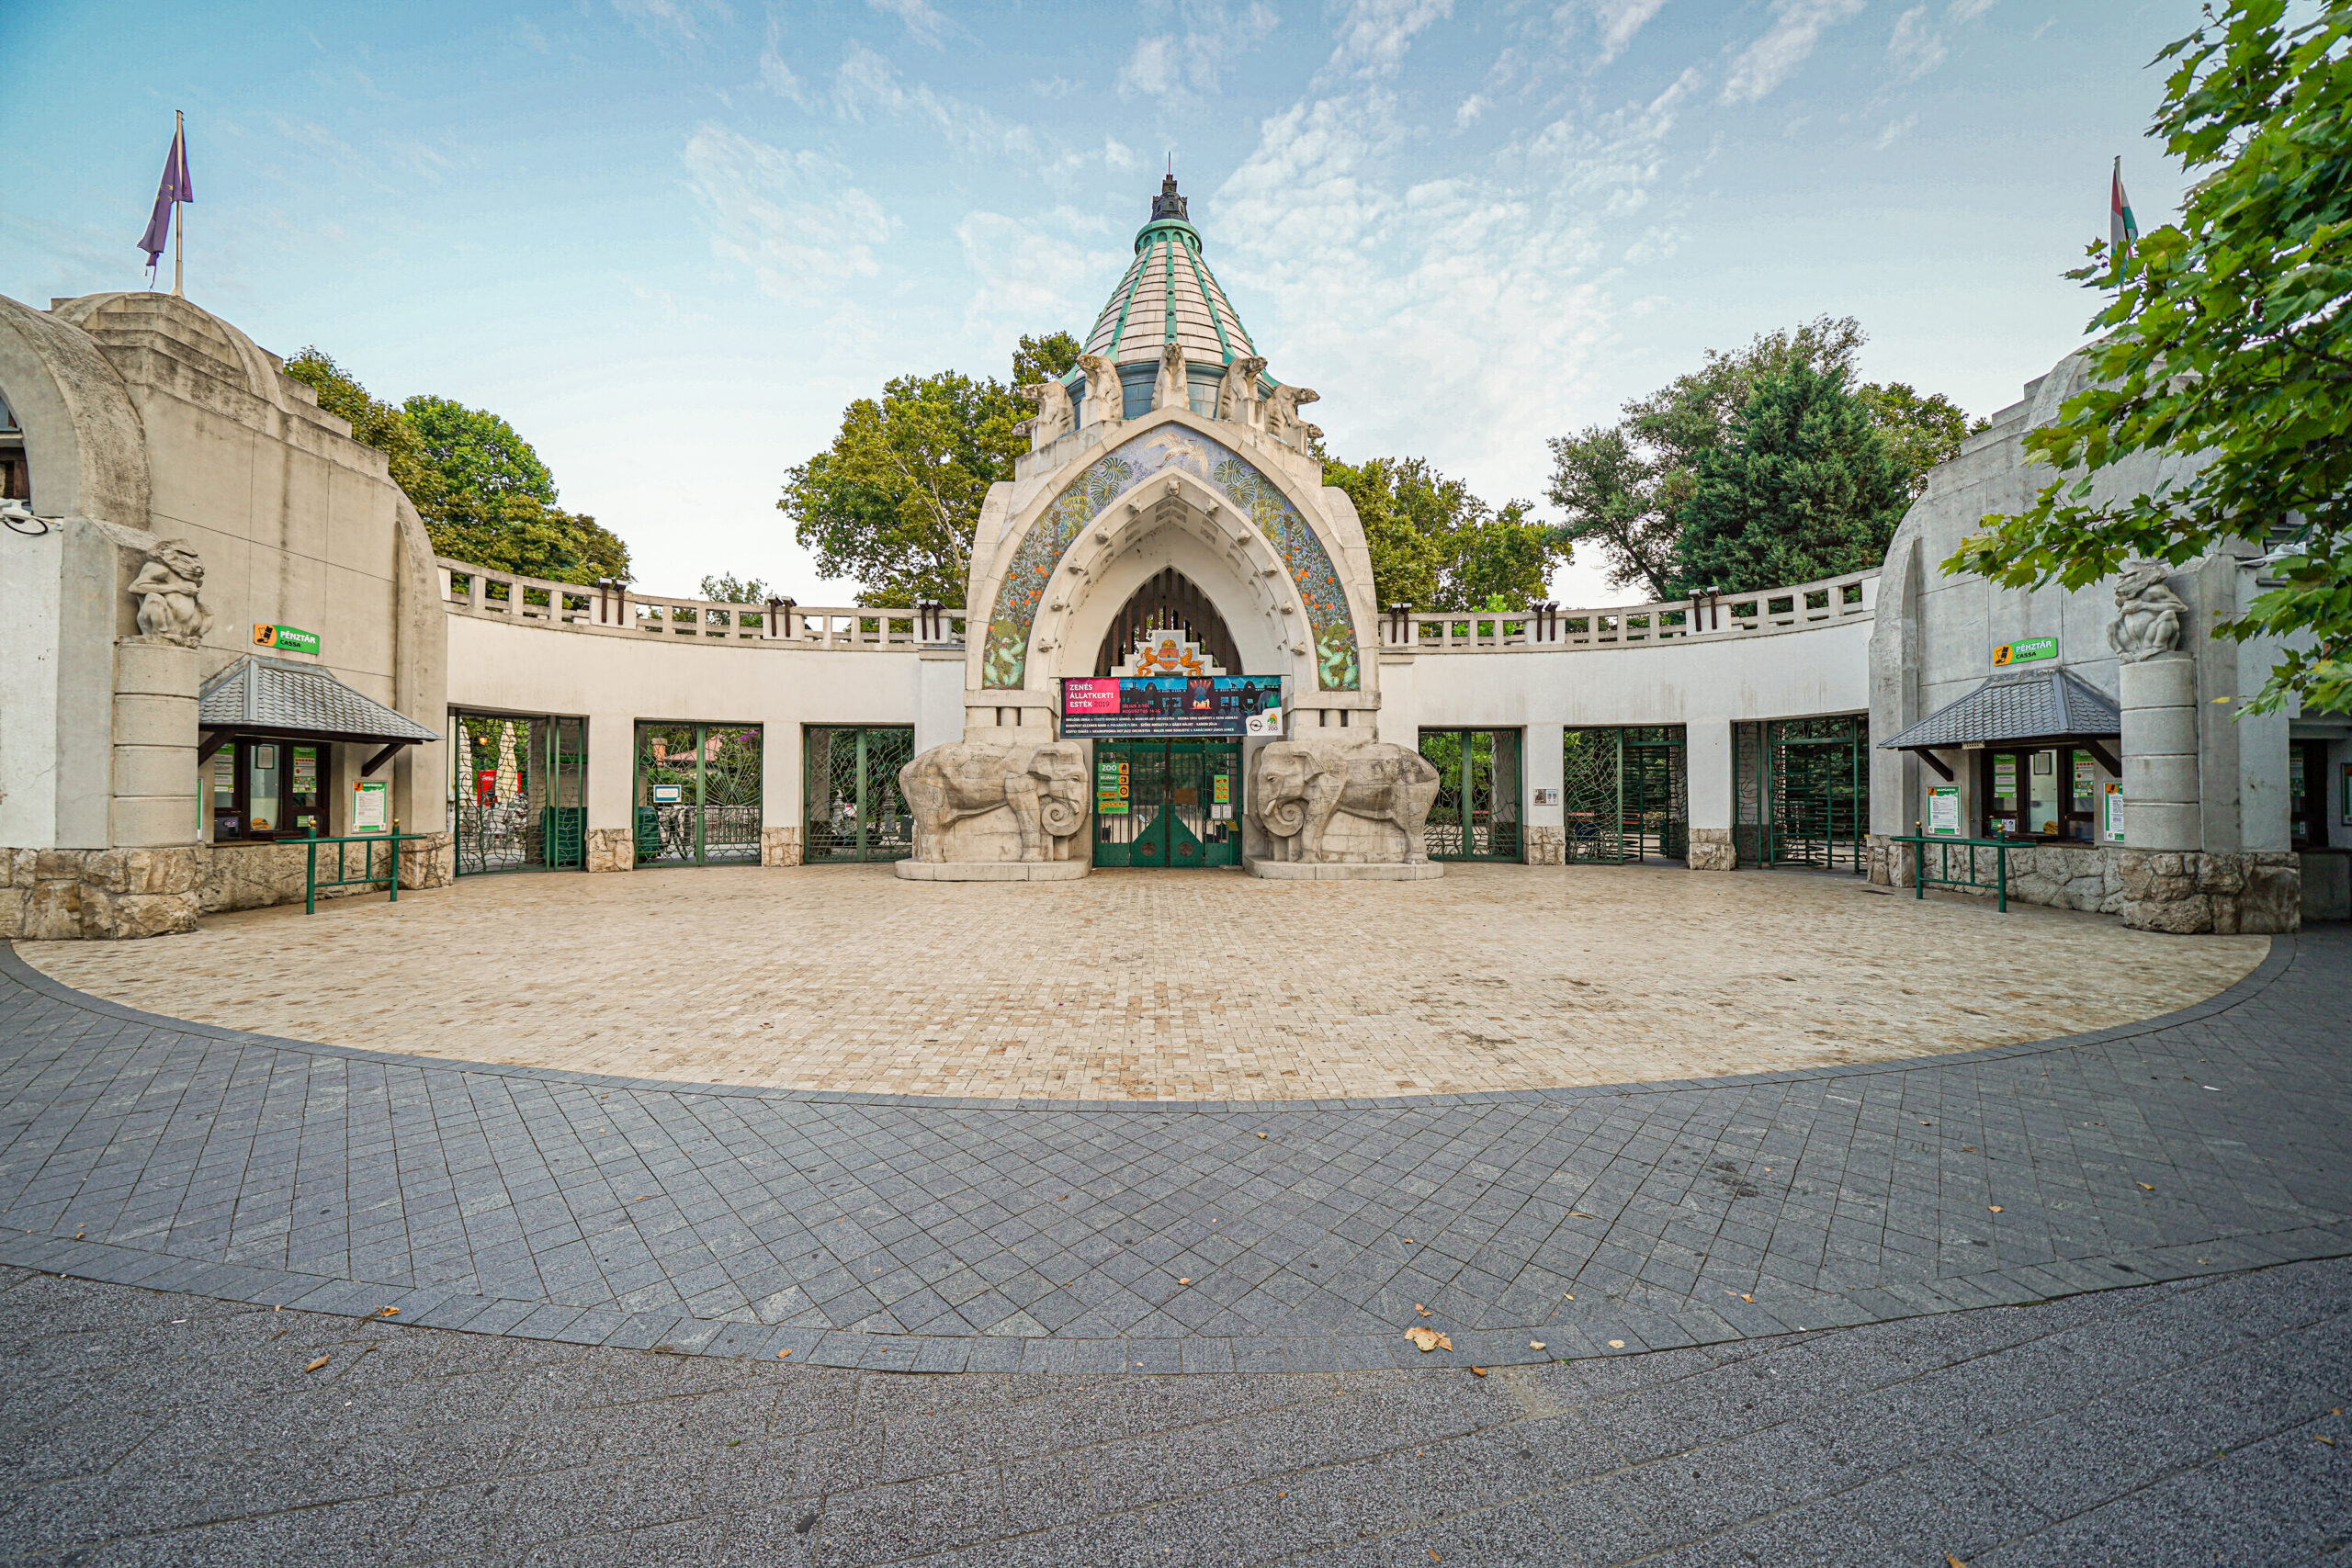 The entrance of Budapest Zoo